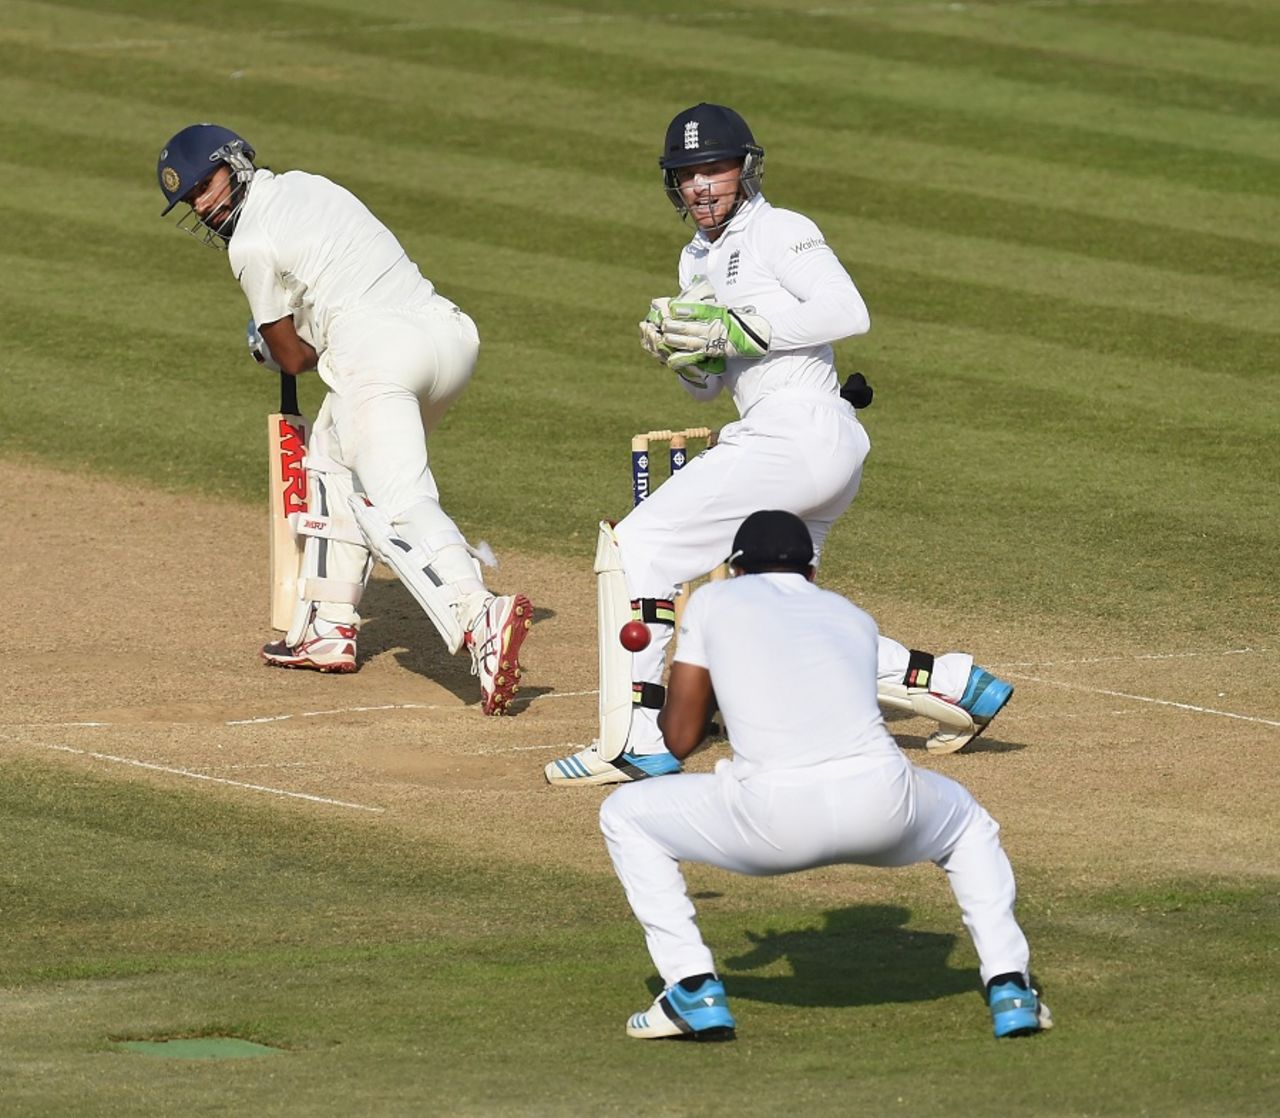 Shikhar Dhawan watches as his outside edge is about to be pouched, England v India, 3rd Investec Test, Ageas Bowl, 4th day, July 30, 2014